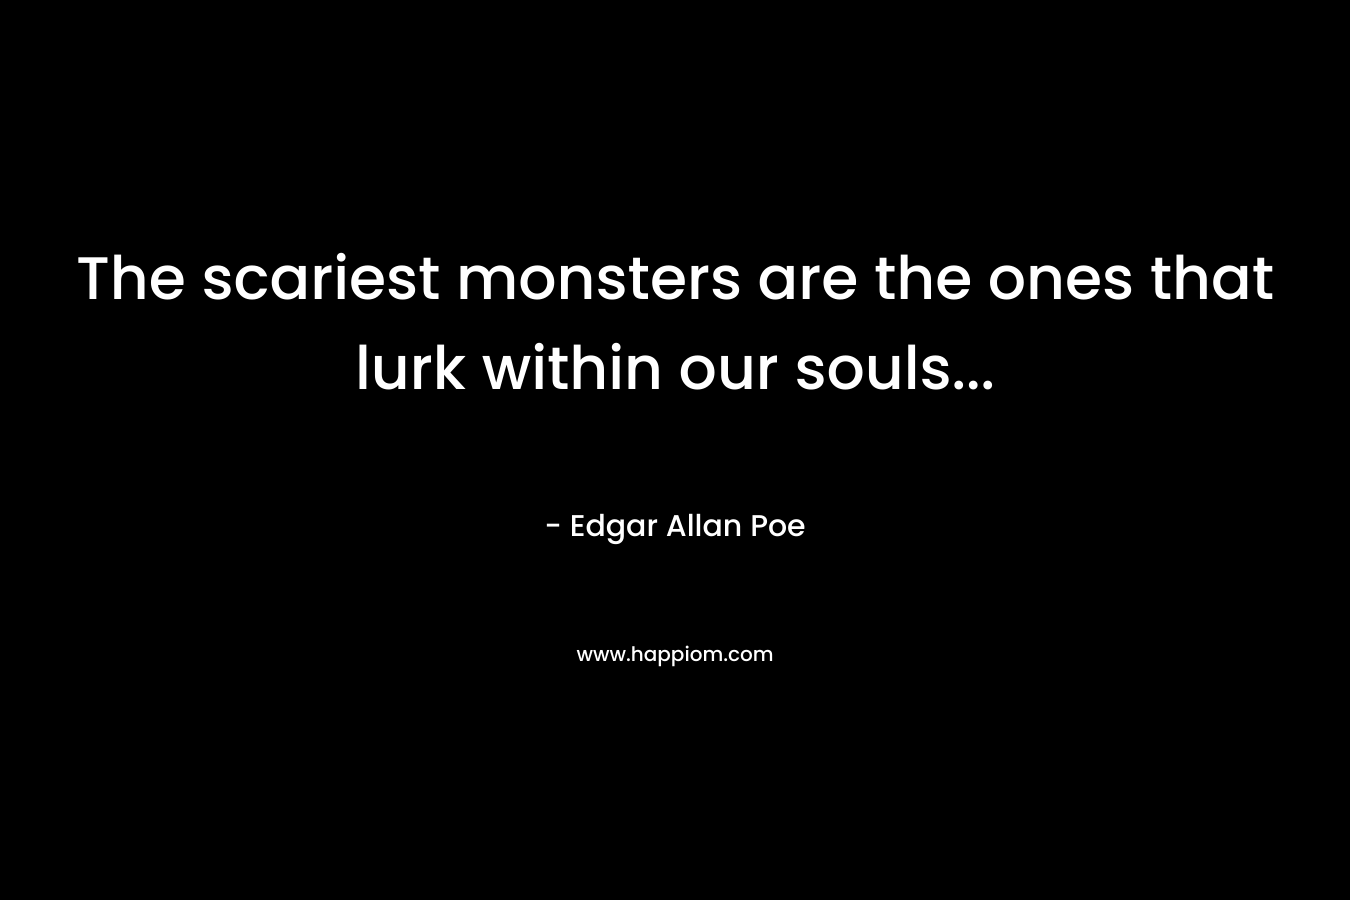 The scariest monsters are the ones that lurk within our souls...